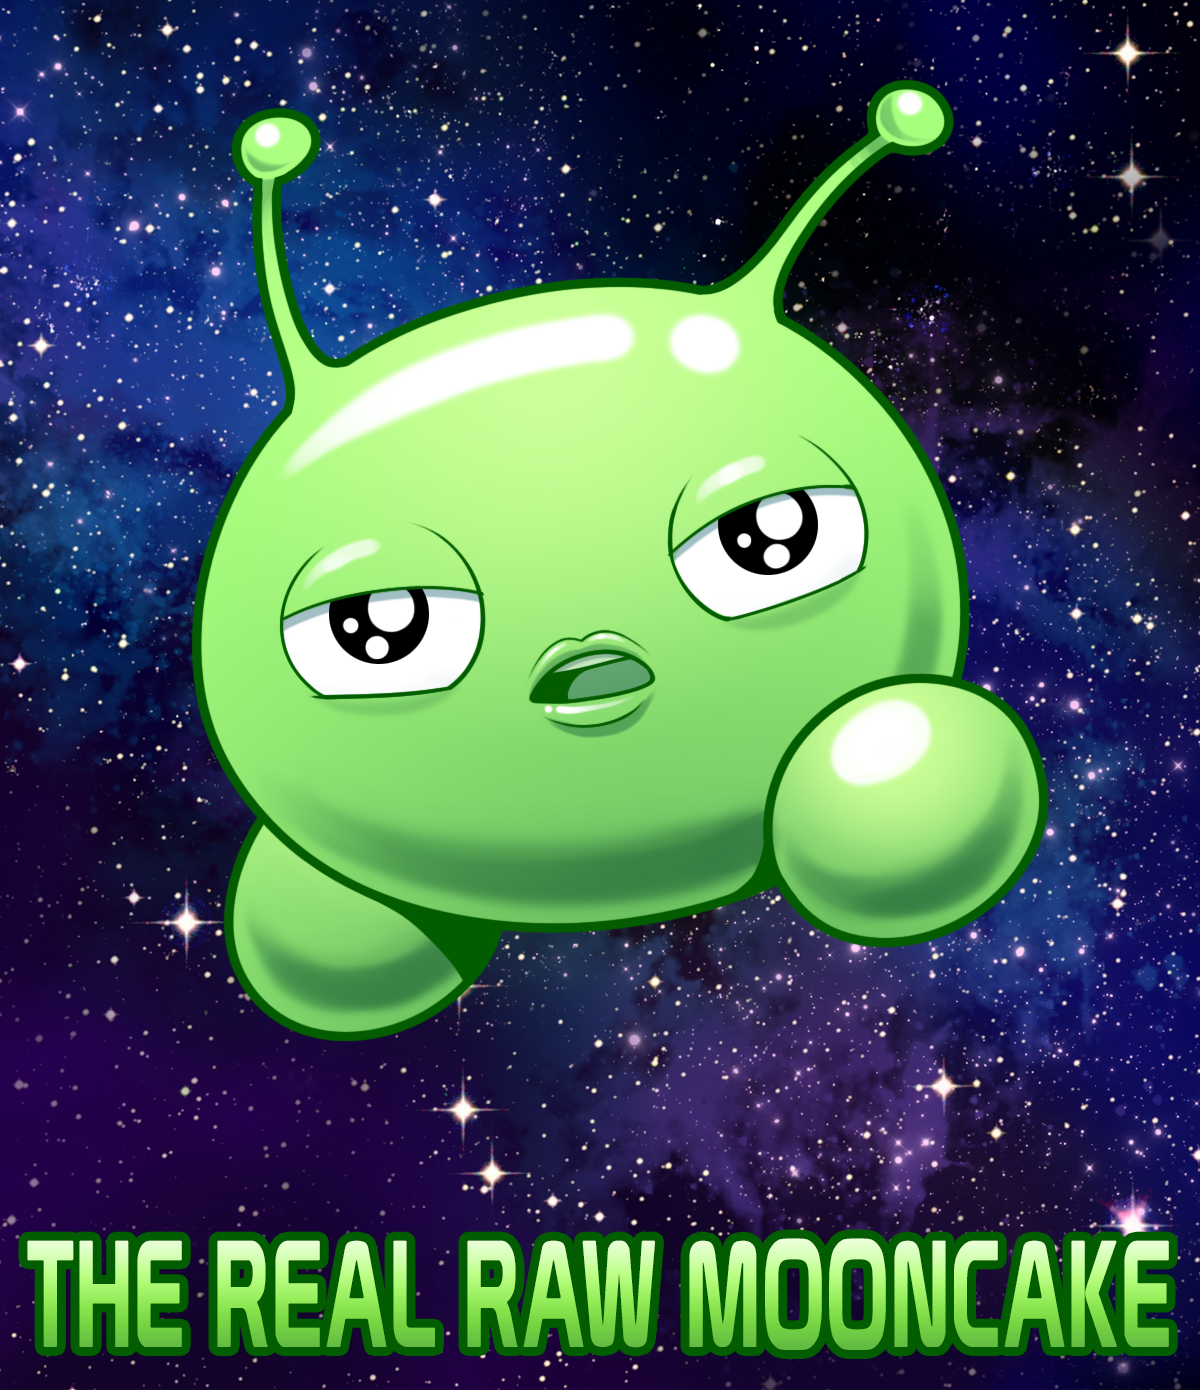 I present to you The REAL RAW mooncake. Oh god, why did I draw